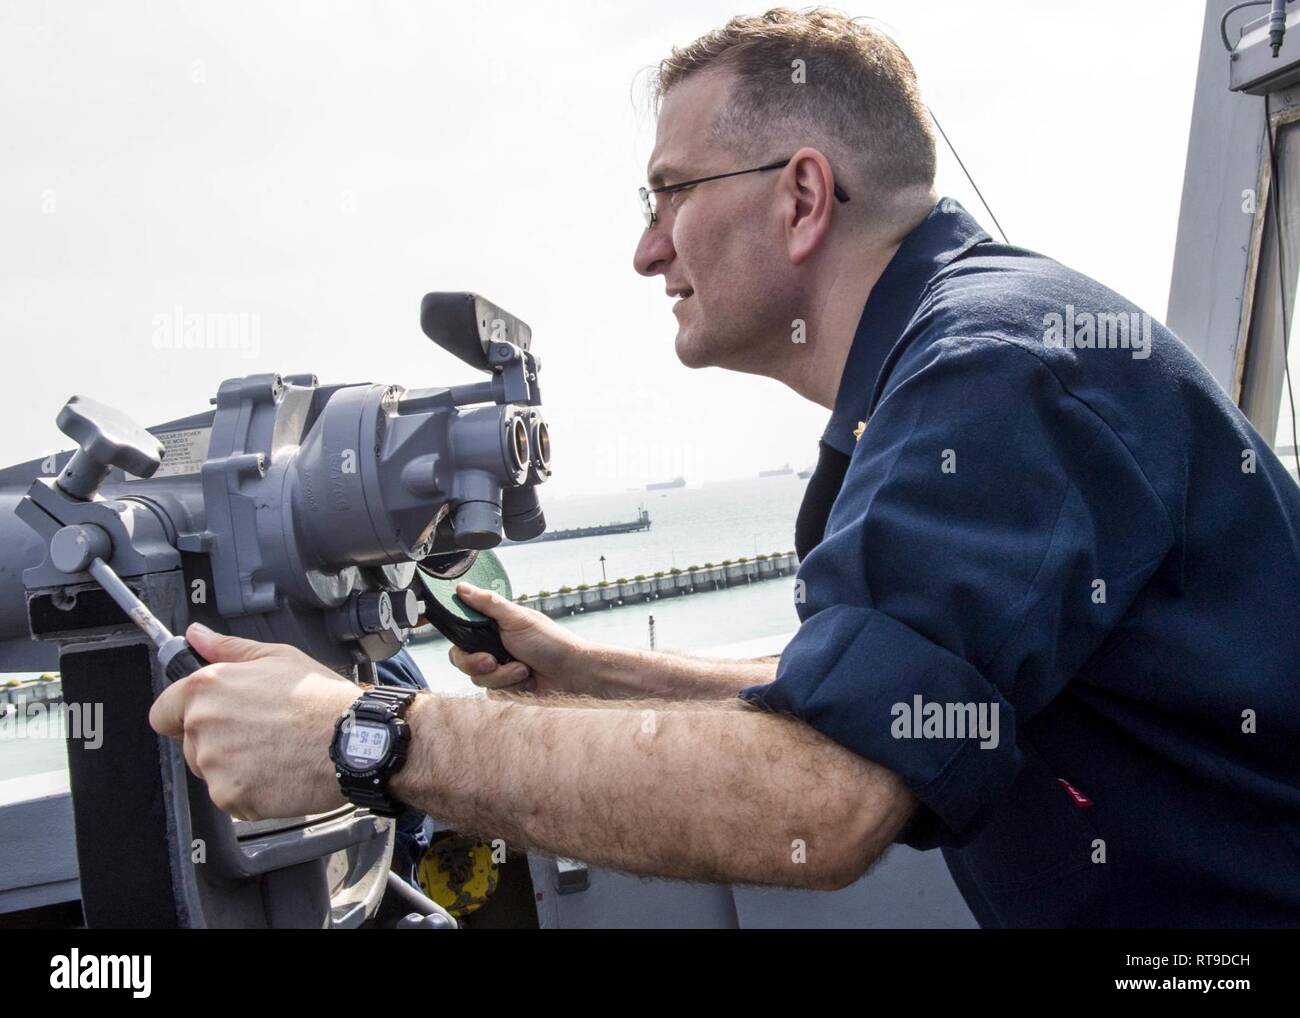 SINGAPORE (Jan. 26, 2019) Lt. Cmdr. Christopher McCurry, executive officer of the San Antonio-class amphibious transport dock ship USS Anchorage (LPD 23), uses the “big eye” binoculars during a sea and anchor detail while on a deployment of the Essex Amphibious Ready Group (ARG) and 13th Marine Expeditionary Unit (MEU). The Essex ARG/13th MEU is a capable and lethal Navy-Marine Corps team deployed to the 7th fleet area of operations to support regional stability, reassure partners and allies and maintain a presence postured to respond to any crisis ranging from humanitarian assistance to conti Stock Photo